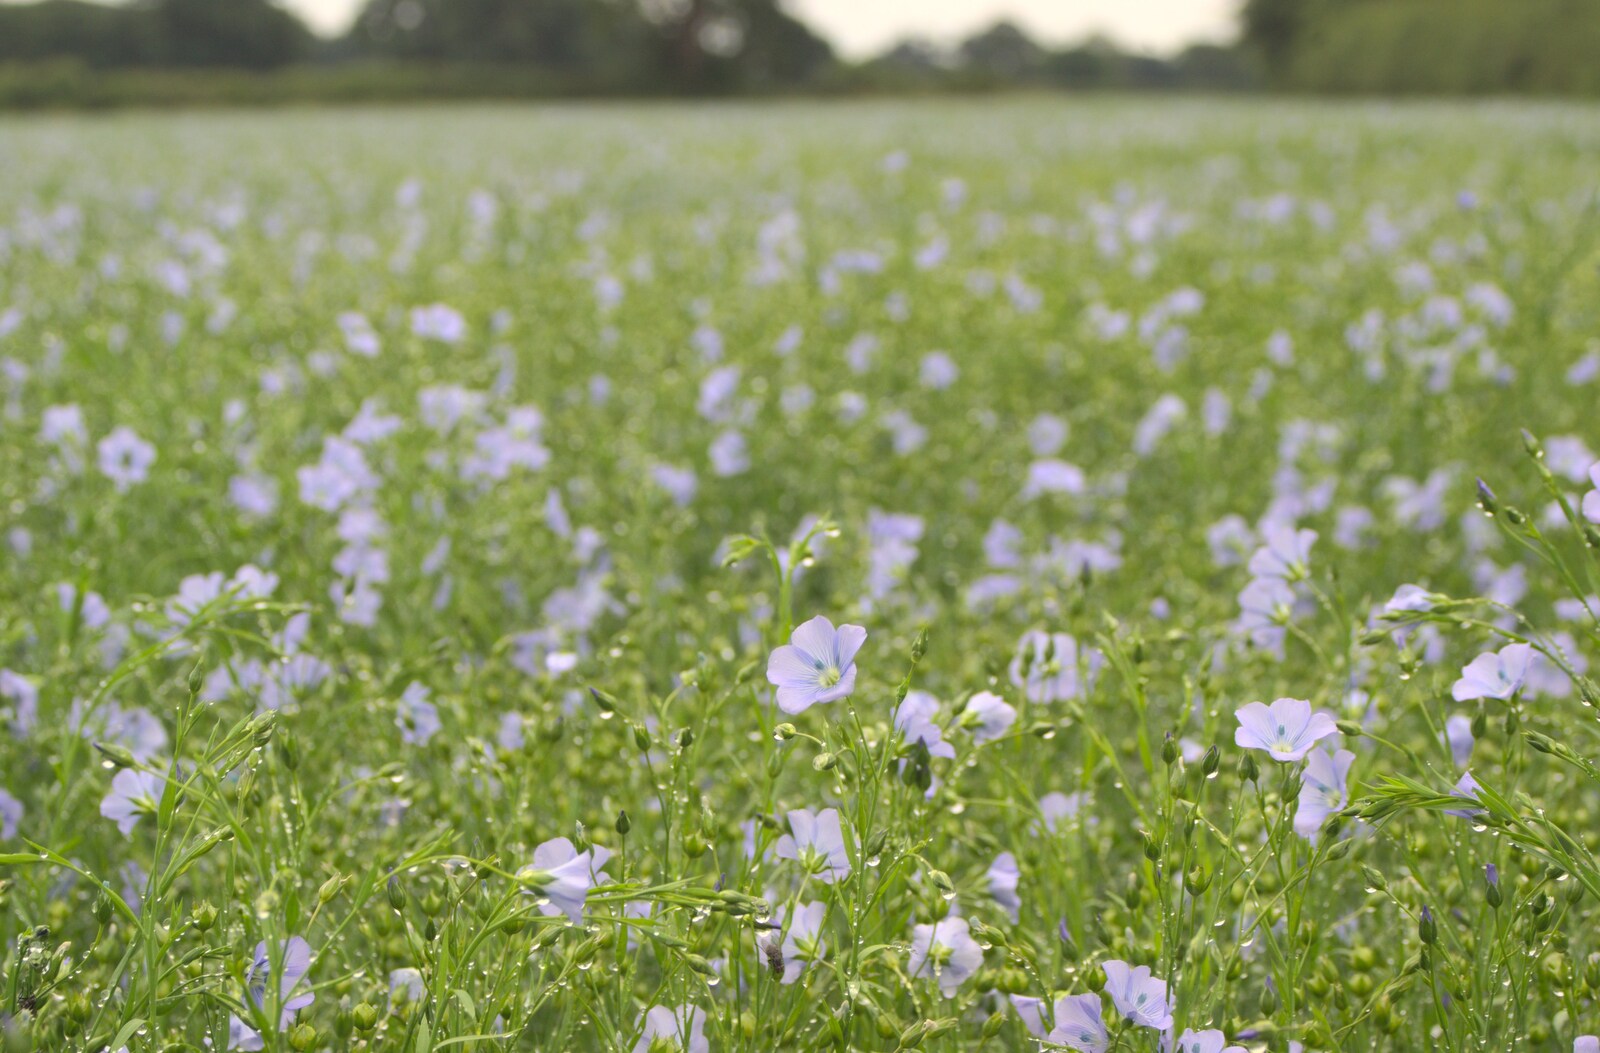 Linseed flowers near Bransgore from A Camper Van Odyssey: Oxford, Salisbury, New Forest and Barton-on-Sea - 19th June 2011